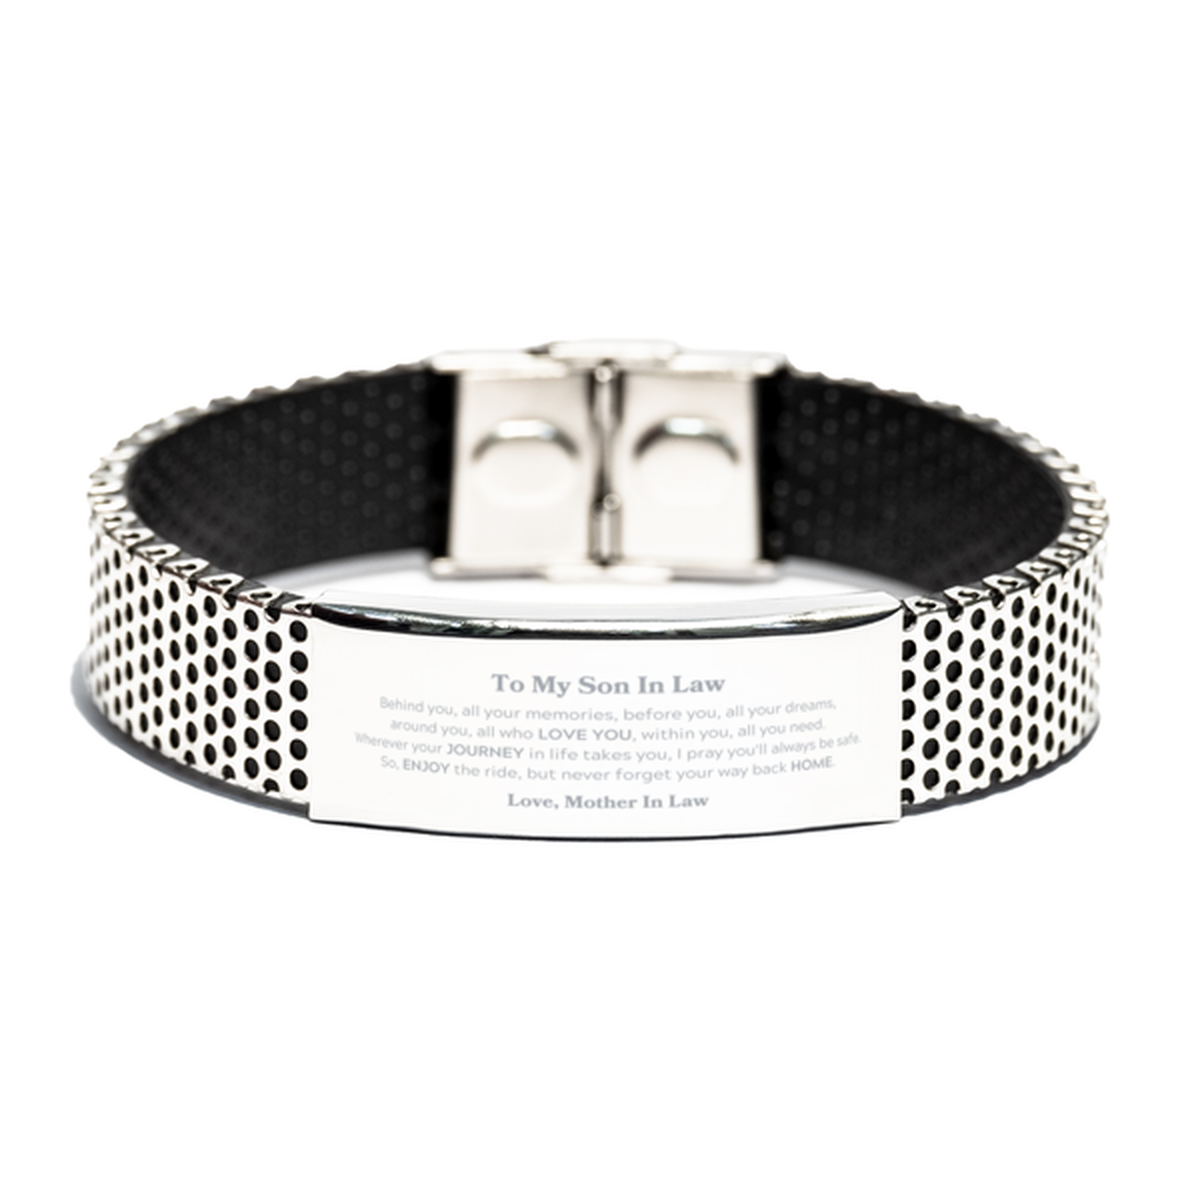 To My Son In Law Graduation Gifts from Mother In Law, Son In Law Stainless Steel Bracelet Christmas Birthday Gifts for Son In Law Behind you, all your memories, before you, all your dreams. Love, Mother In Law